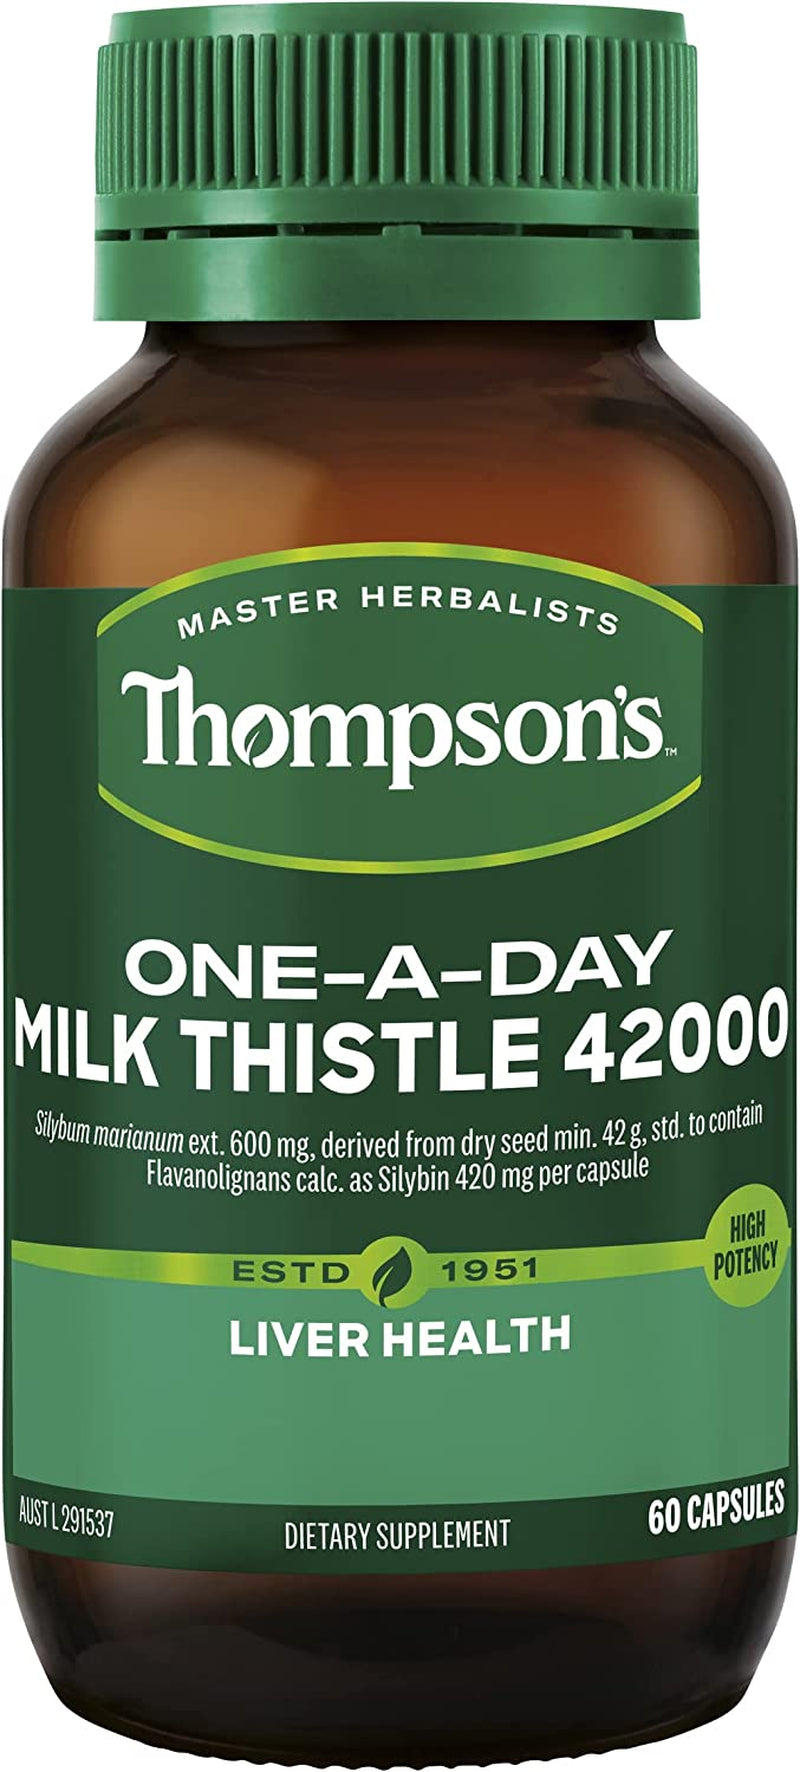 One-A-Day Milk Thistle 42000Mg 60 Capsules | Digestive Health | Healthy Liver Function | Detoxification | Antioxidant